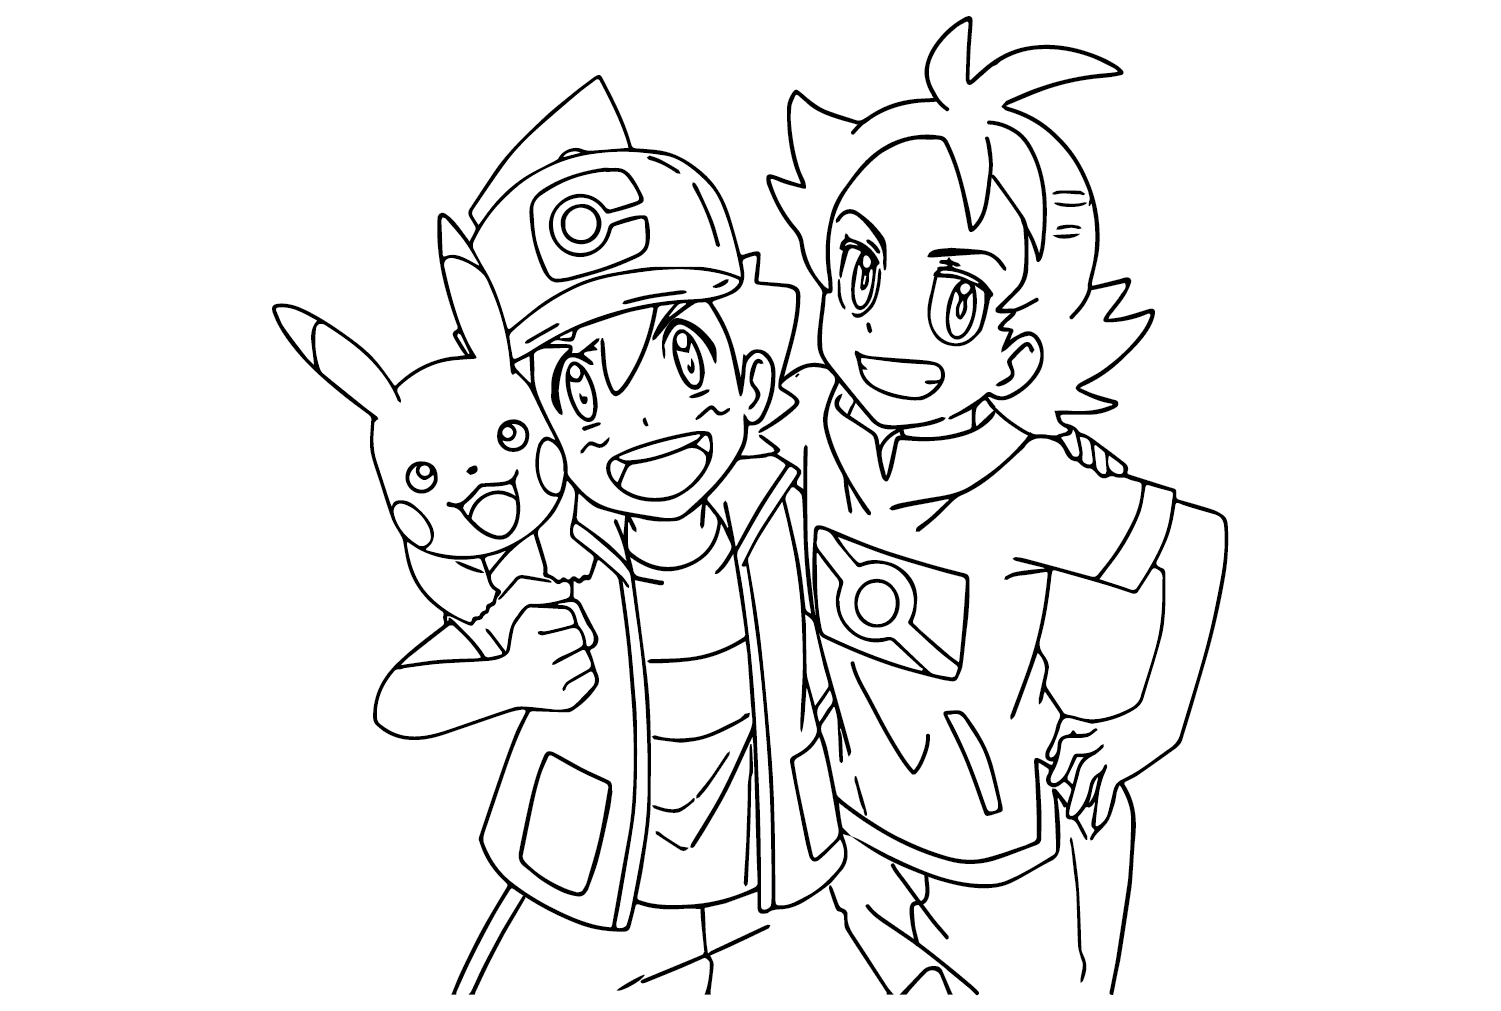 Ash and Goh Pokemon Coloring Page from Ash Ketchum